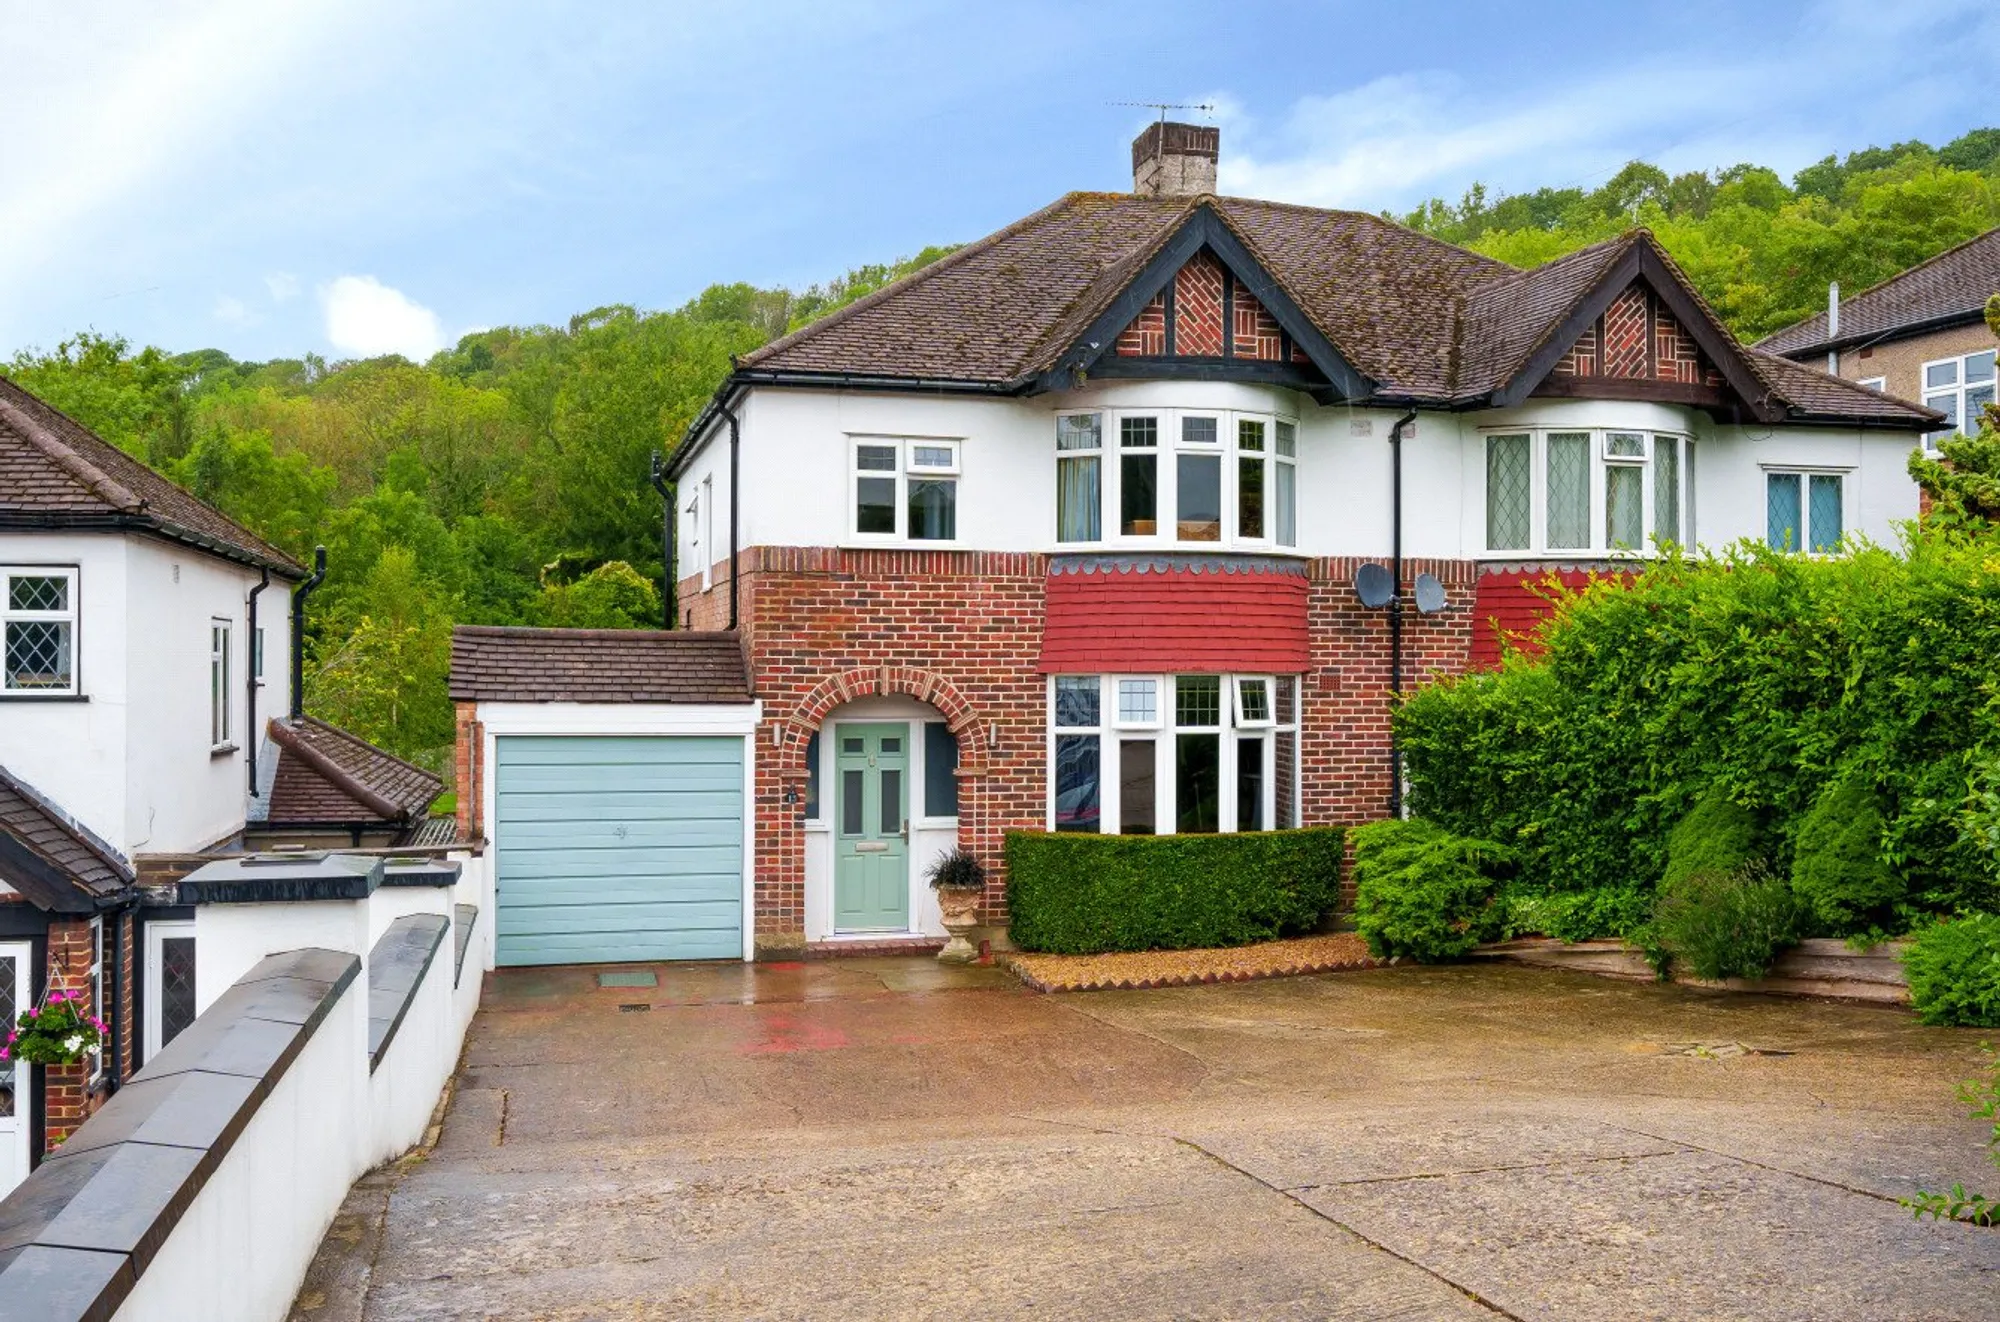 3 bed semi-detached house for sale in Tithepit Shaw Lane, Warlingham - Property Image 1